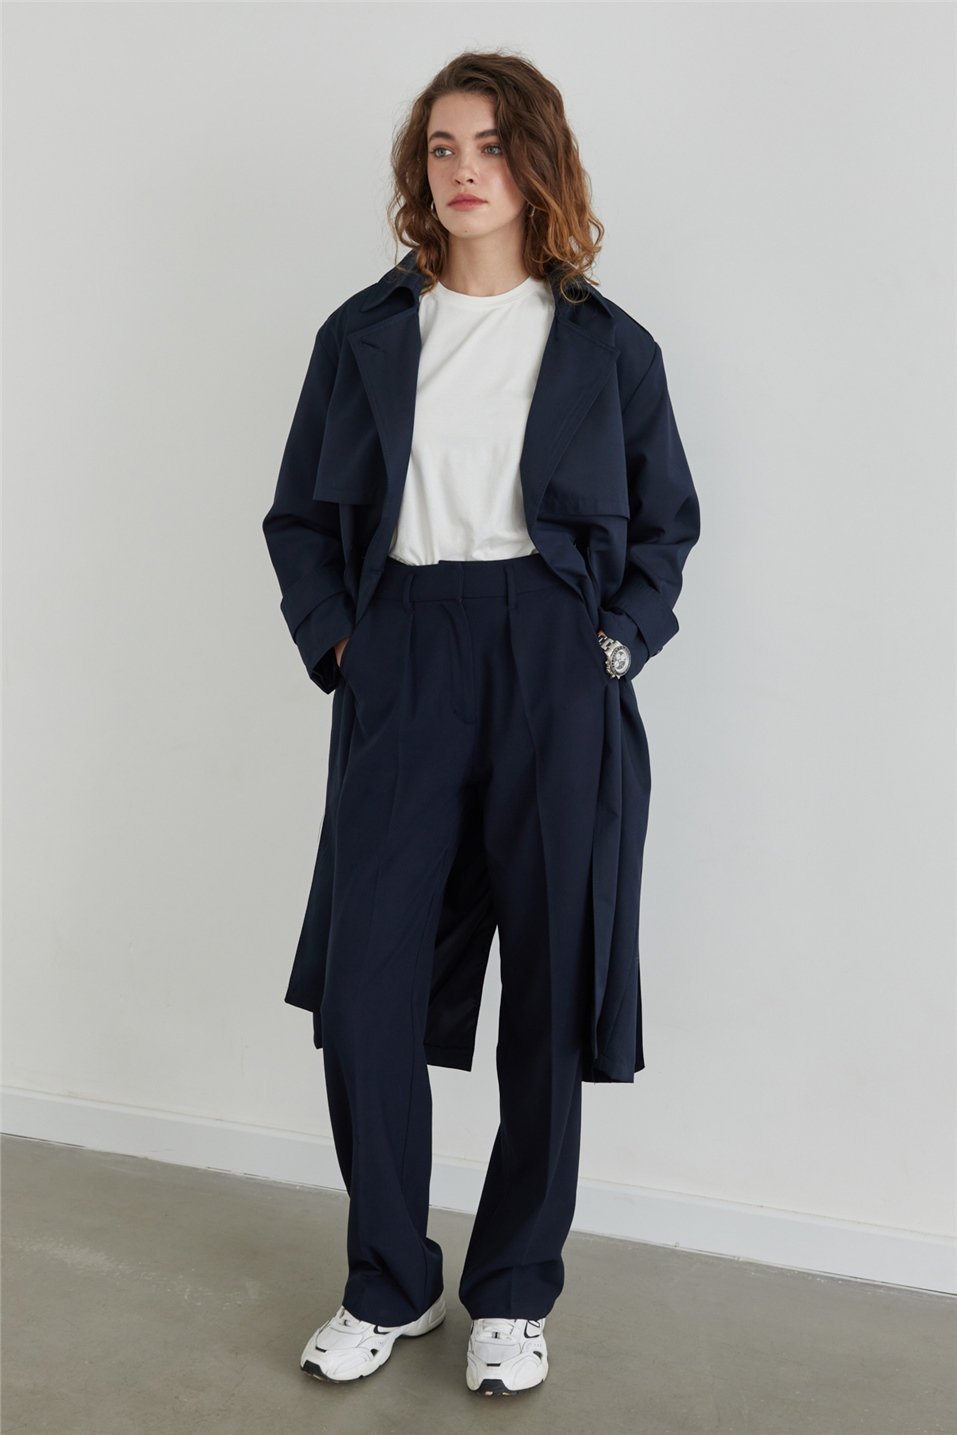 Navy Single Pleated Soft Textured Trousers